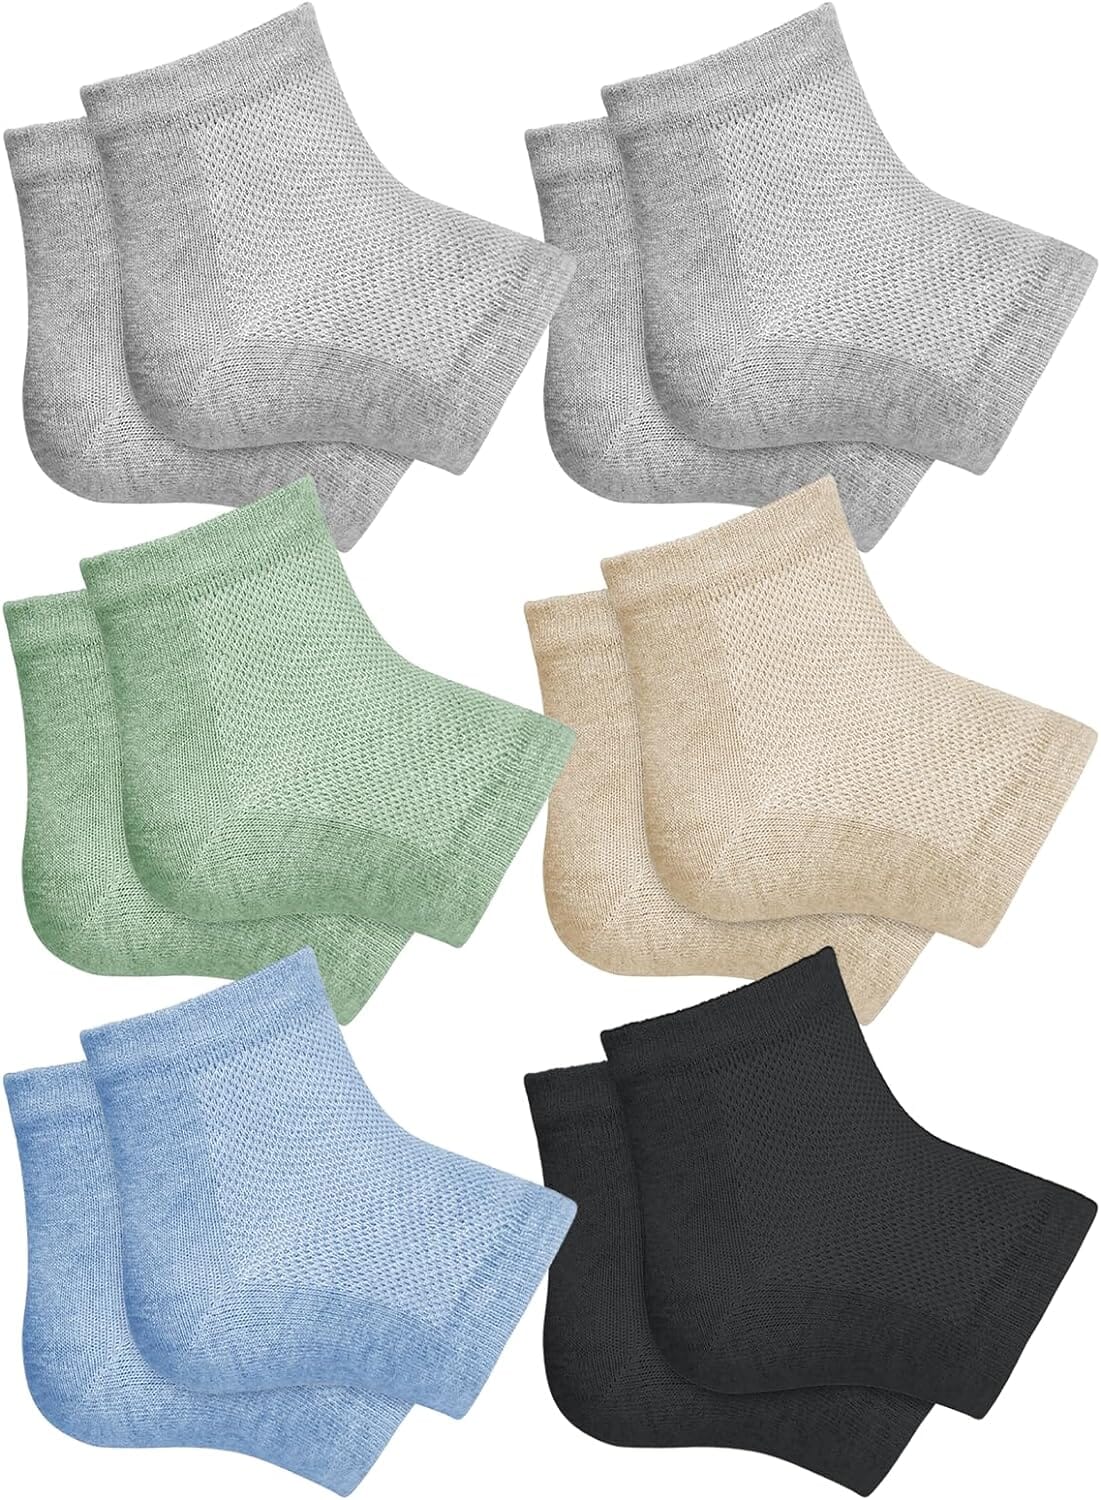 Dr. Frederick&#39;s Original Moisturizing Heel Socks - 2 Pairs - for Dry Cracked Heels - Choose Your Color Cracked Heel Dr. Frederick&#39;s Original Power Pack 